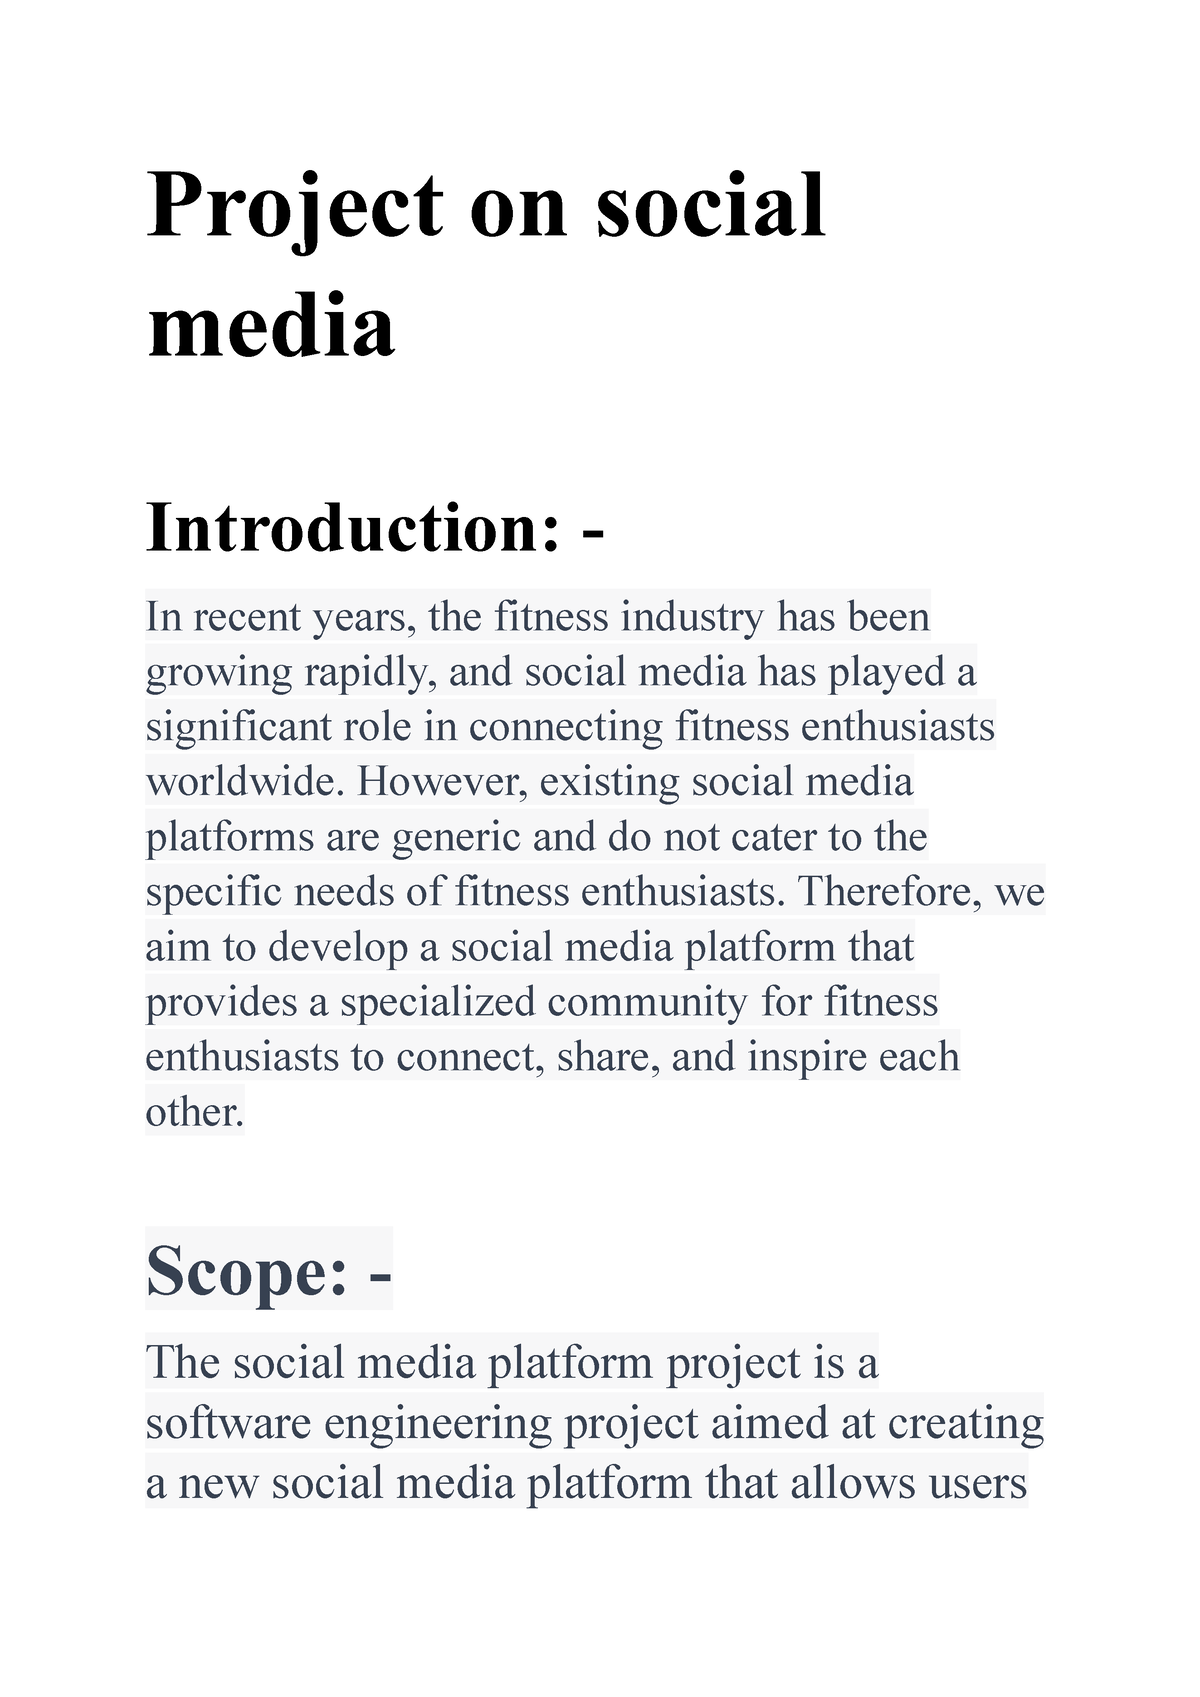 essay introduction about social media